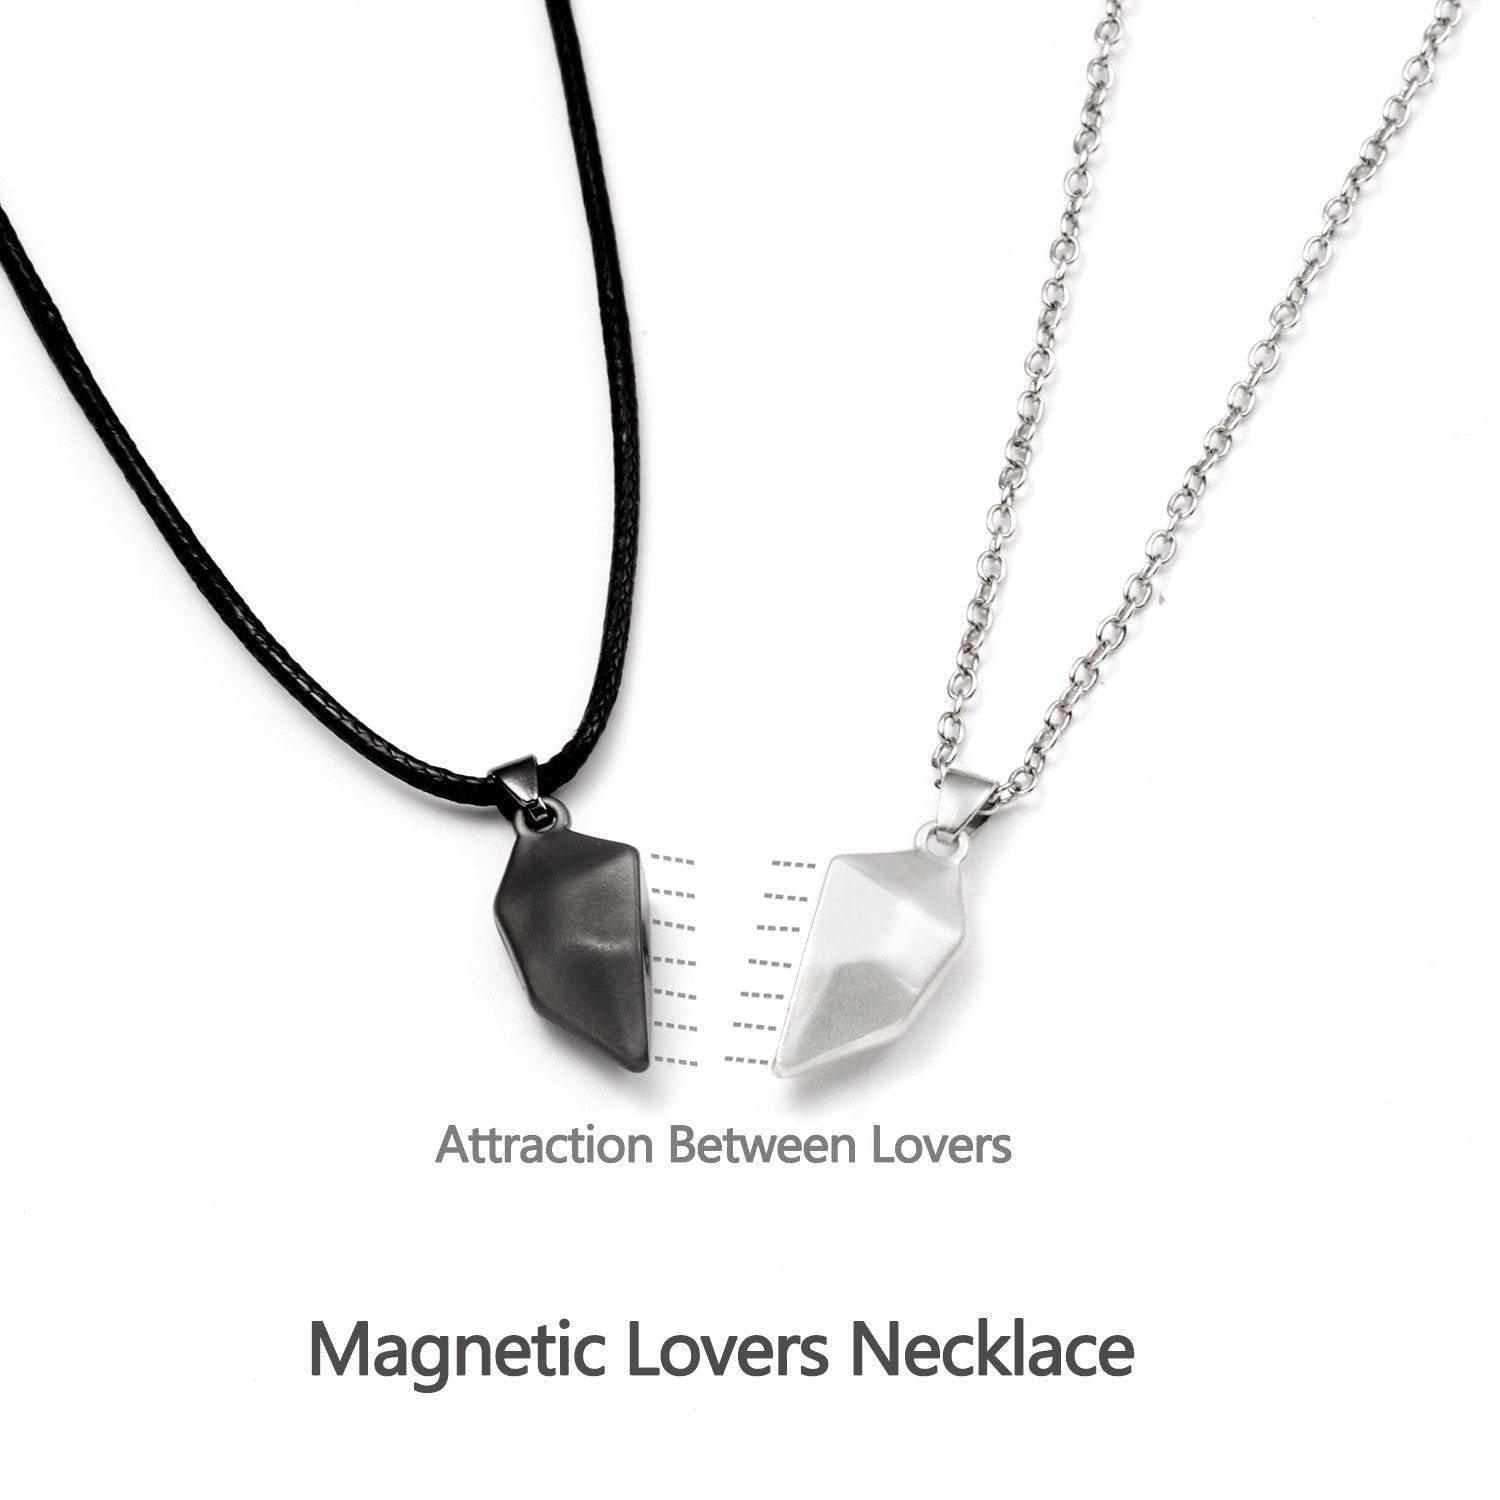 Best Friends Necklace Gift Set for 2 Magnetic in 2023 | Best Friends Necklace Gift Set for 2 Magnetic - undefined | best friend necklace for 2, best friend necklaces magnetic, Friendship Pendant Necklaces, gift ideas for Best Friends, Magnetic Friendship necklace, Magnetic heart Necklace, To My Best Friend Friendship Gift Necklace Set | From Hunny Life | hunnylife.com